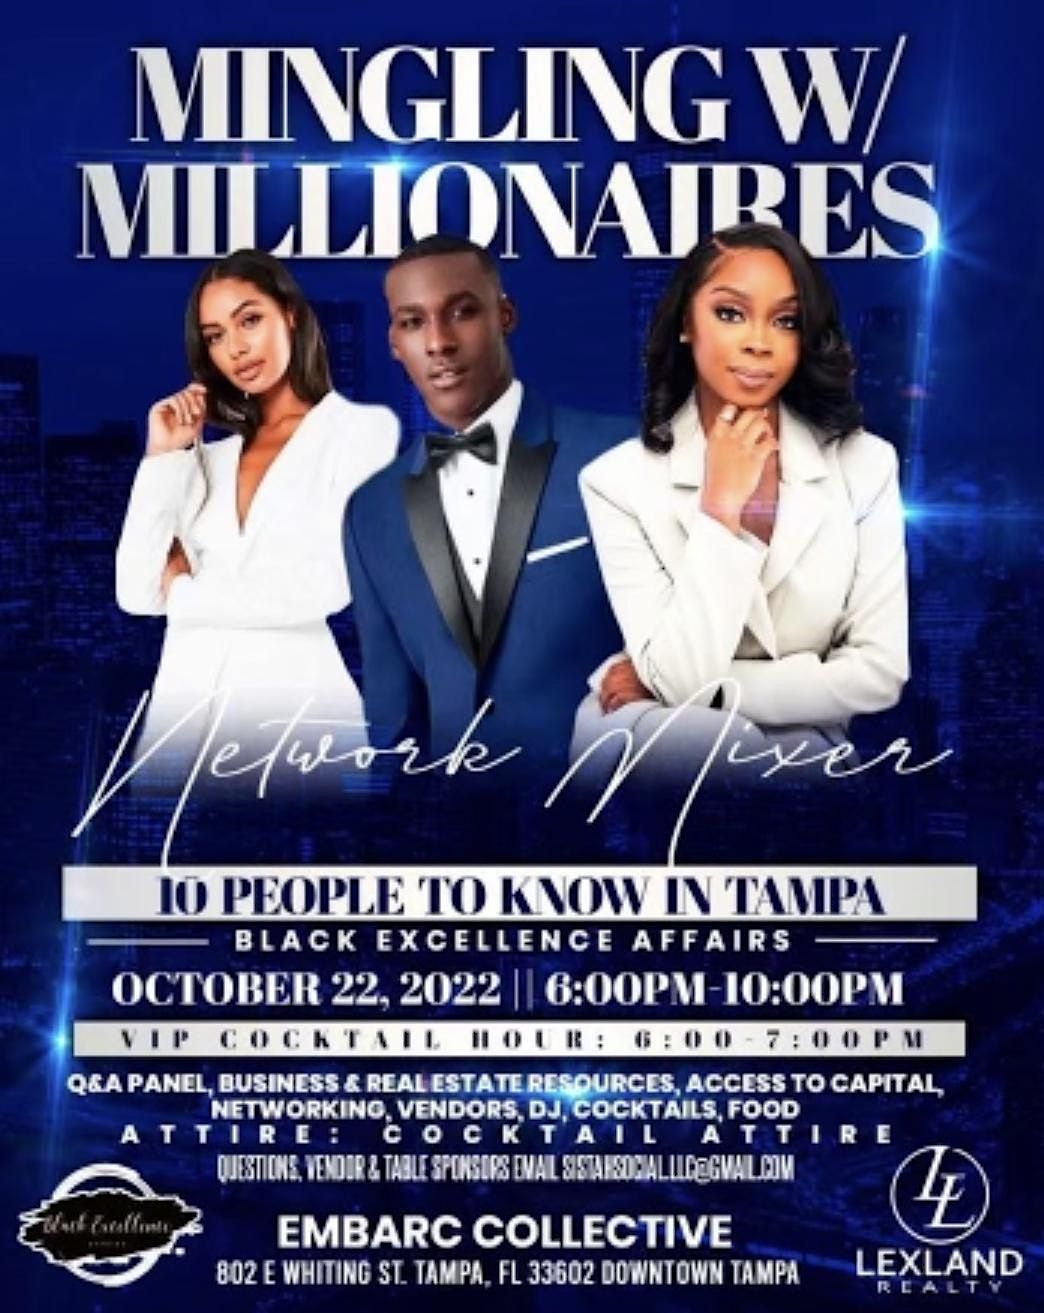 2nd Annual Mingling with Millionaires Networth Mixer -Tampa Bay